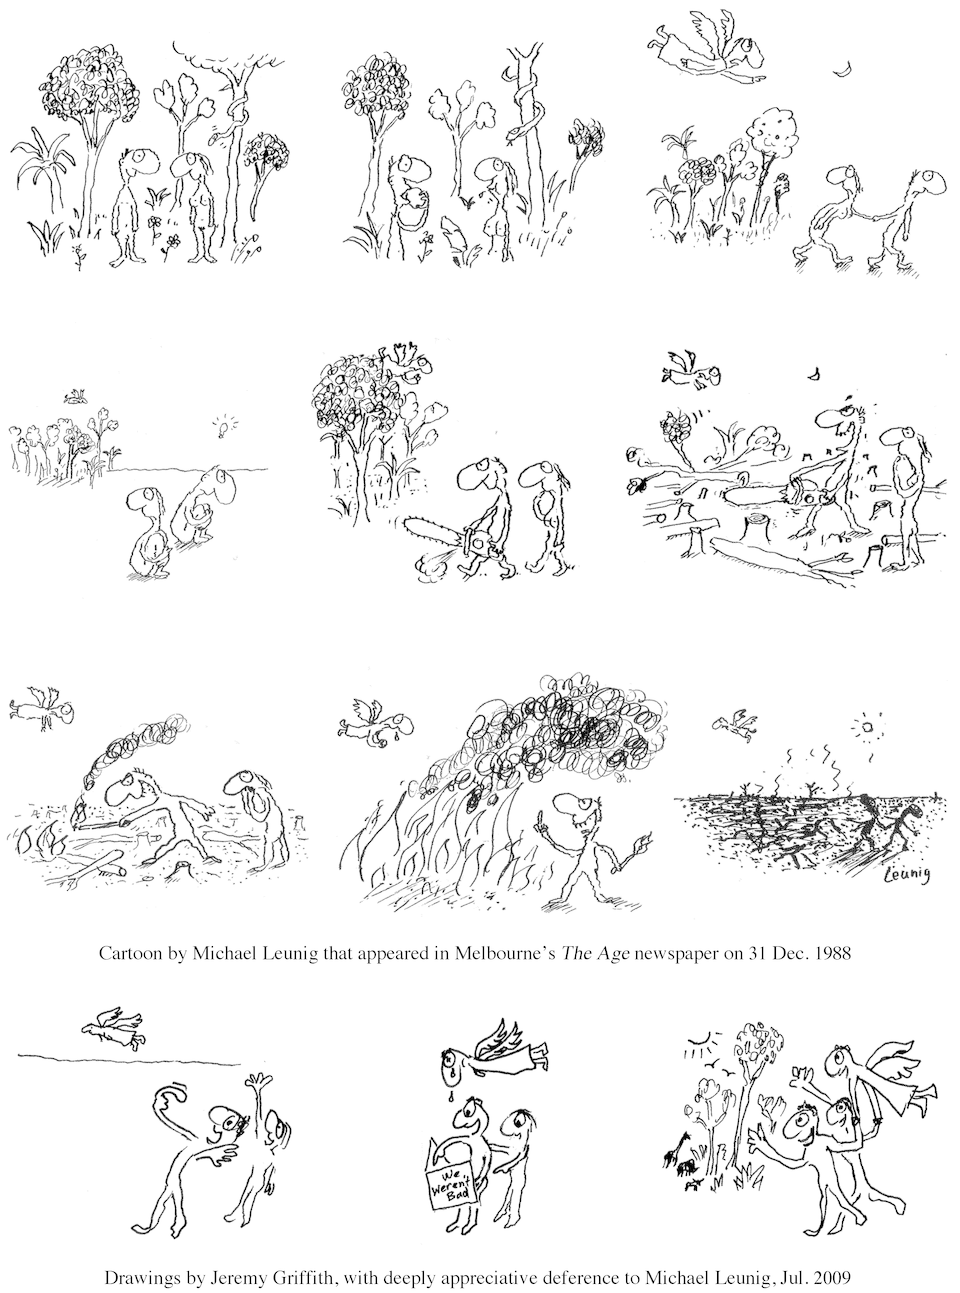 Cartoon by Michael Leunig that appeared in Melbourne’s The Age newspaper on 31 Dec. 1988